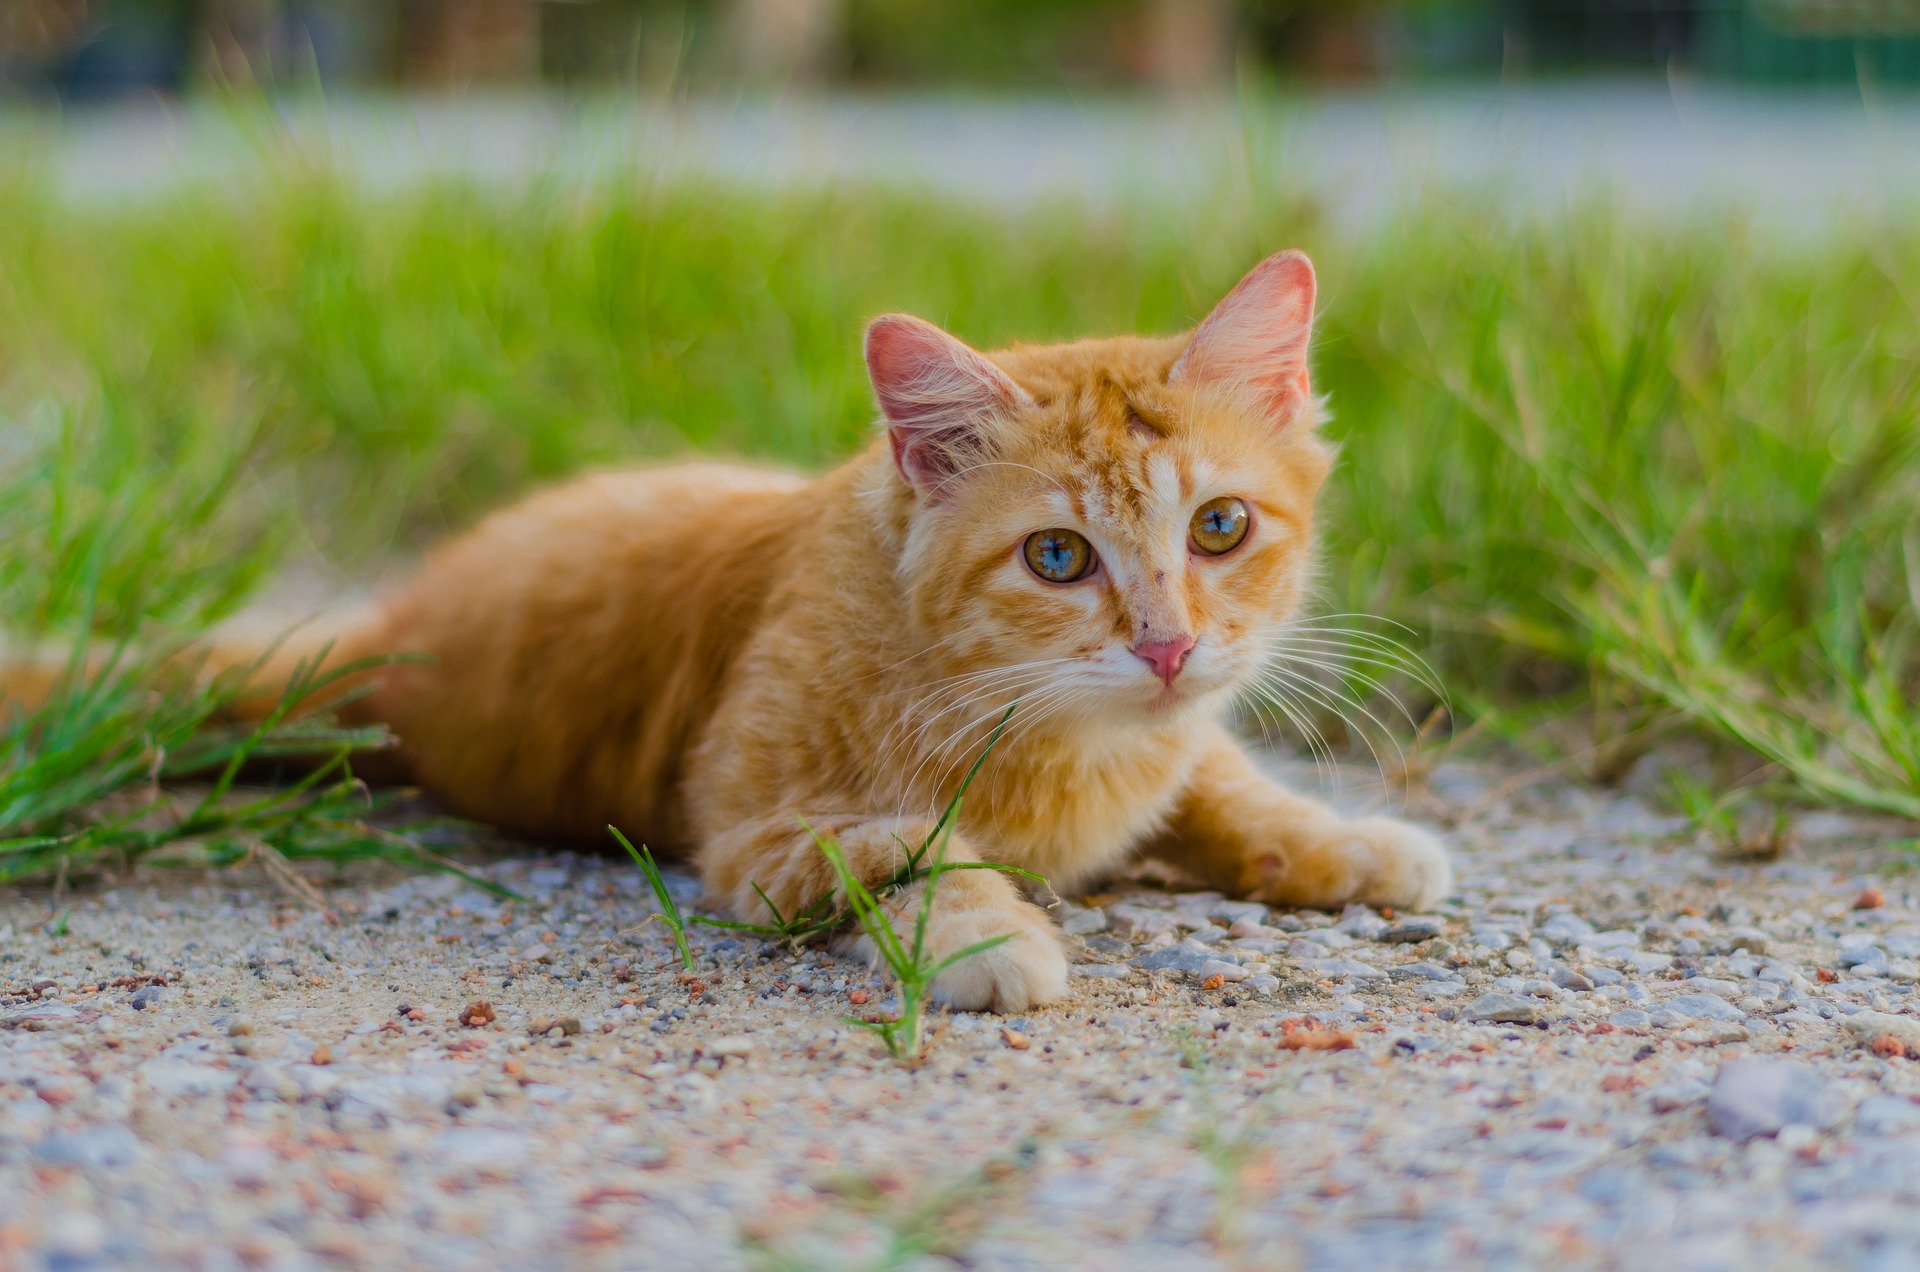 ginger cat in grass - pet inspiration photography